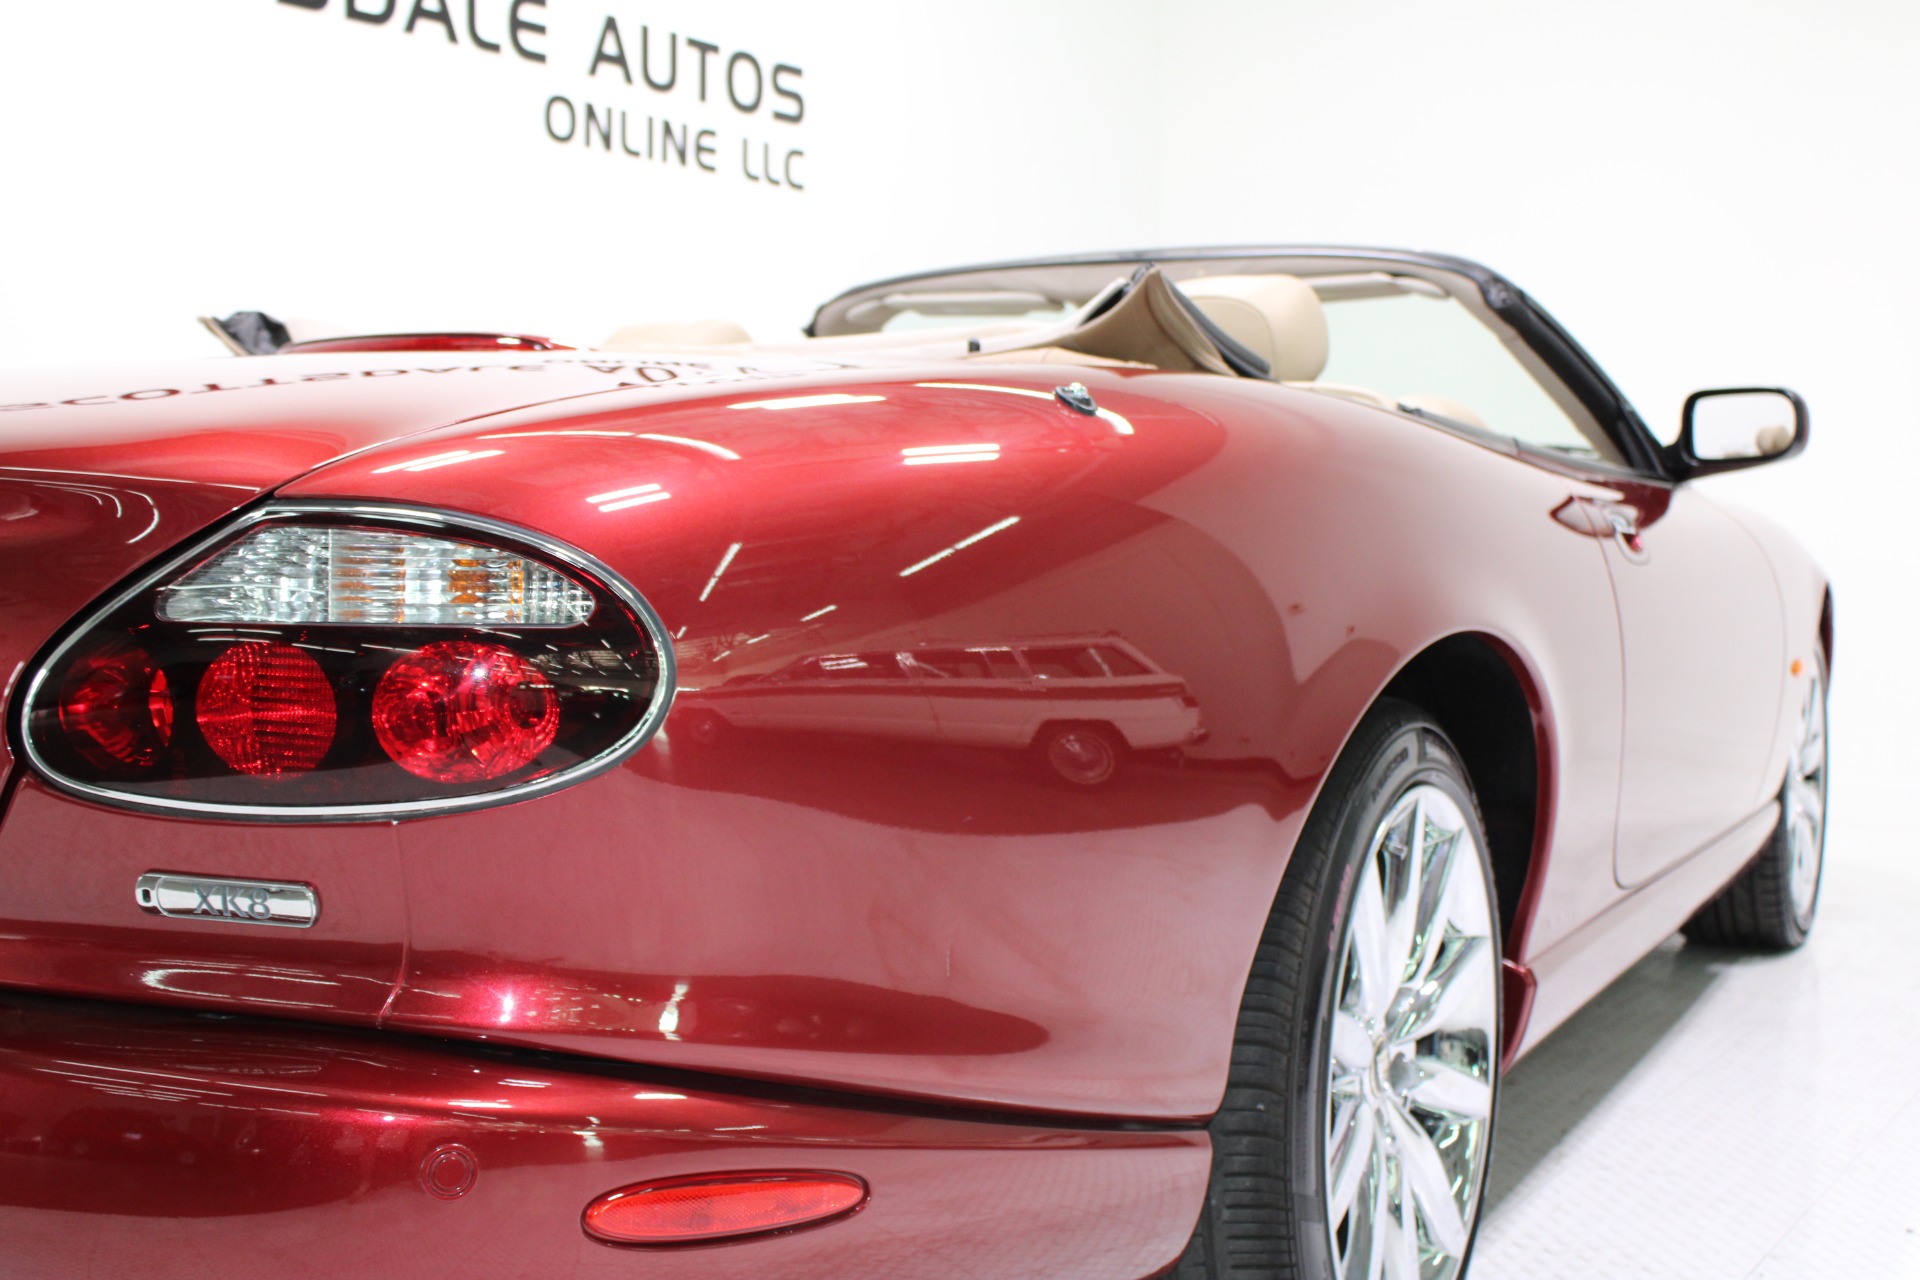 Used-2006-Jaguar-XK8-Victory-Edition-Convertible-Chevrolet